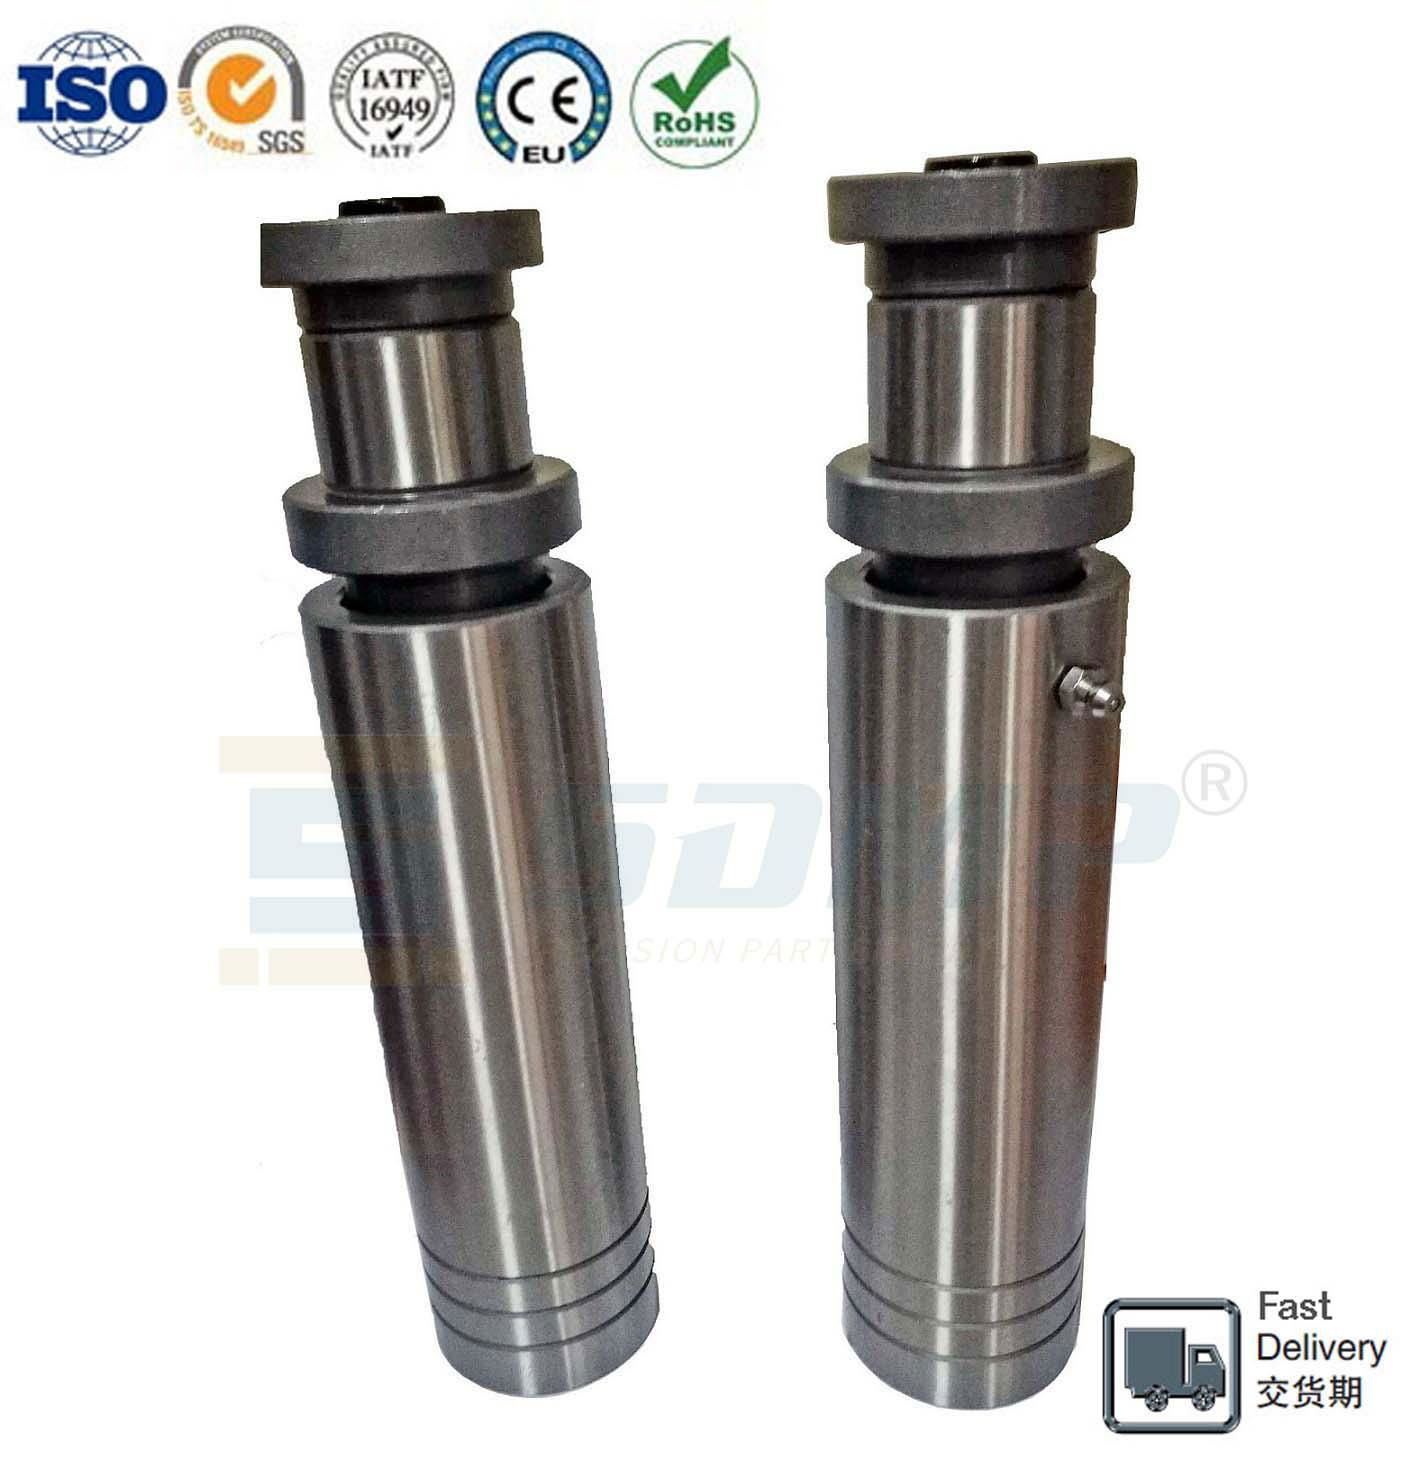 Guide Post and Bushing fit Die Set 2